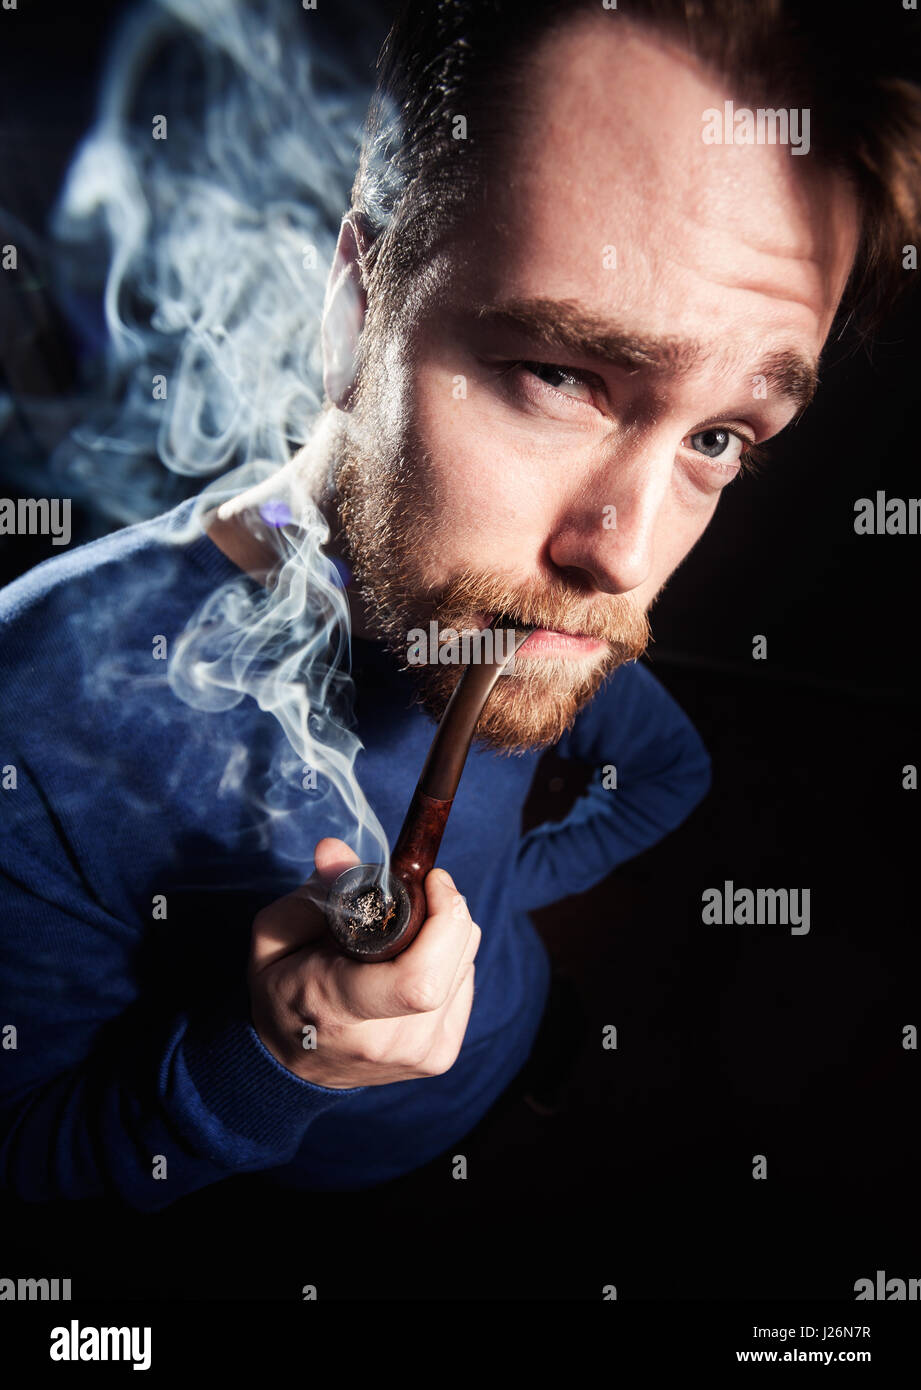 Funny handsome man smoking pipe. Toned photo, wide angle shoot. Stock Photo